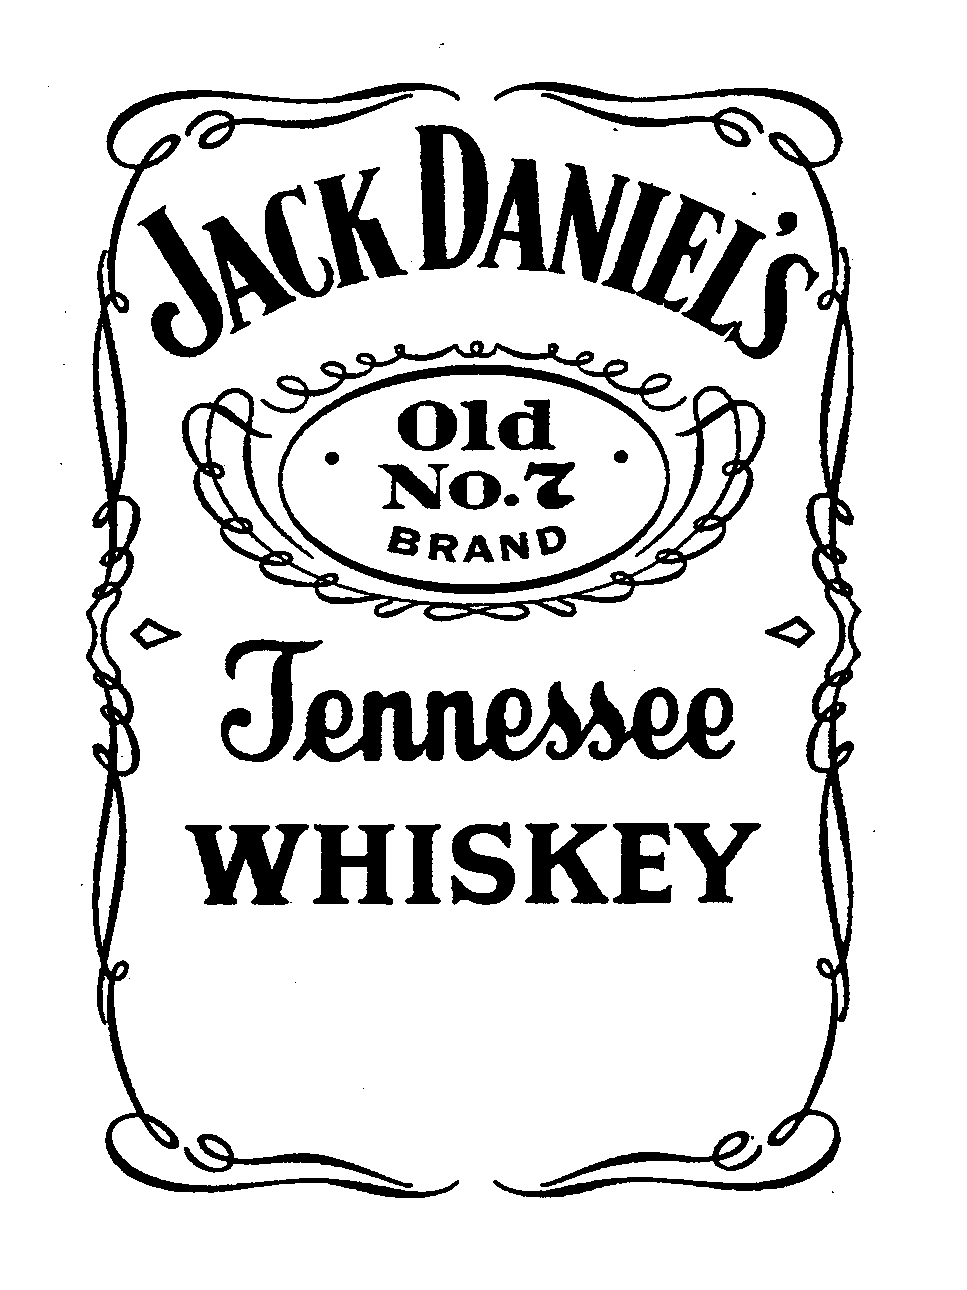  JACK DANIEL'S OLD NO.7 BRAND TENNESSEE WHISKEY